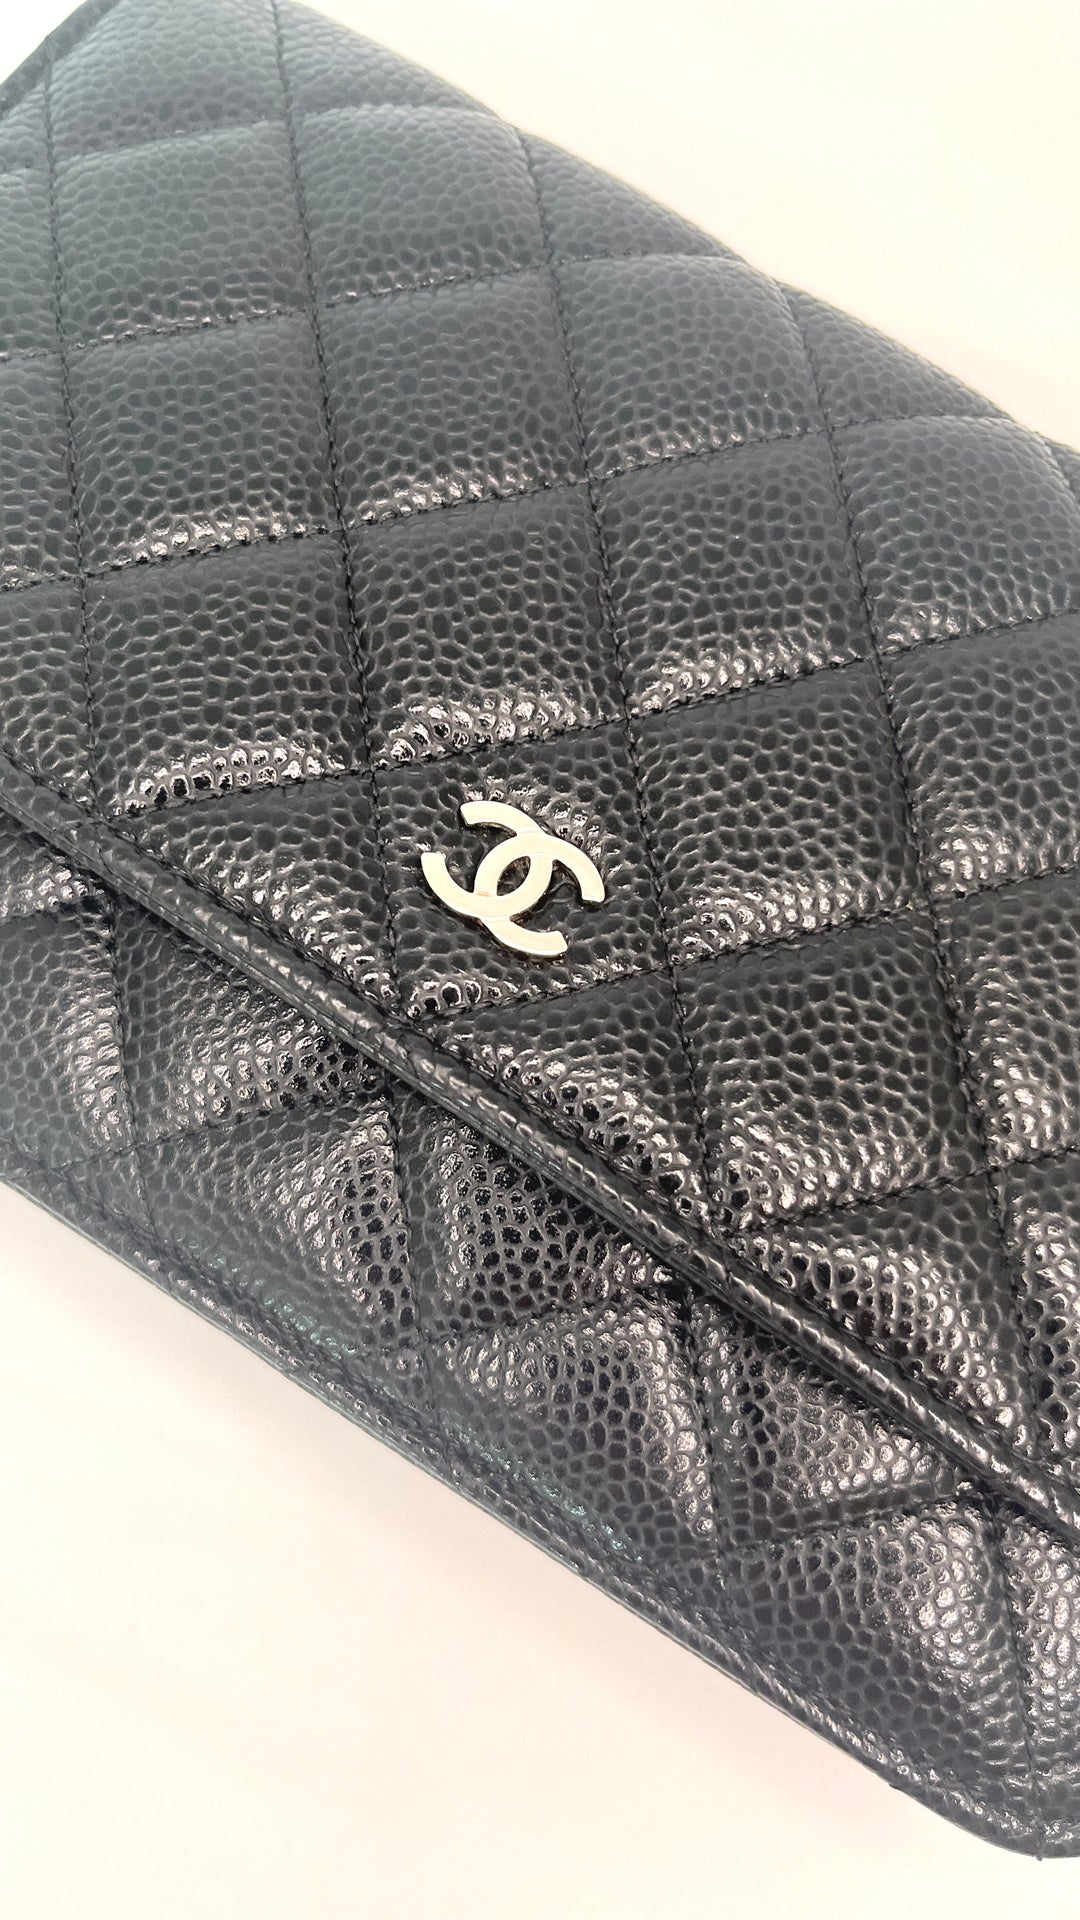 Chanel wallet on chain in black caviar grain leather and silver tone cc hardware